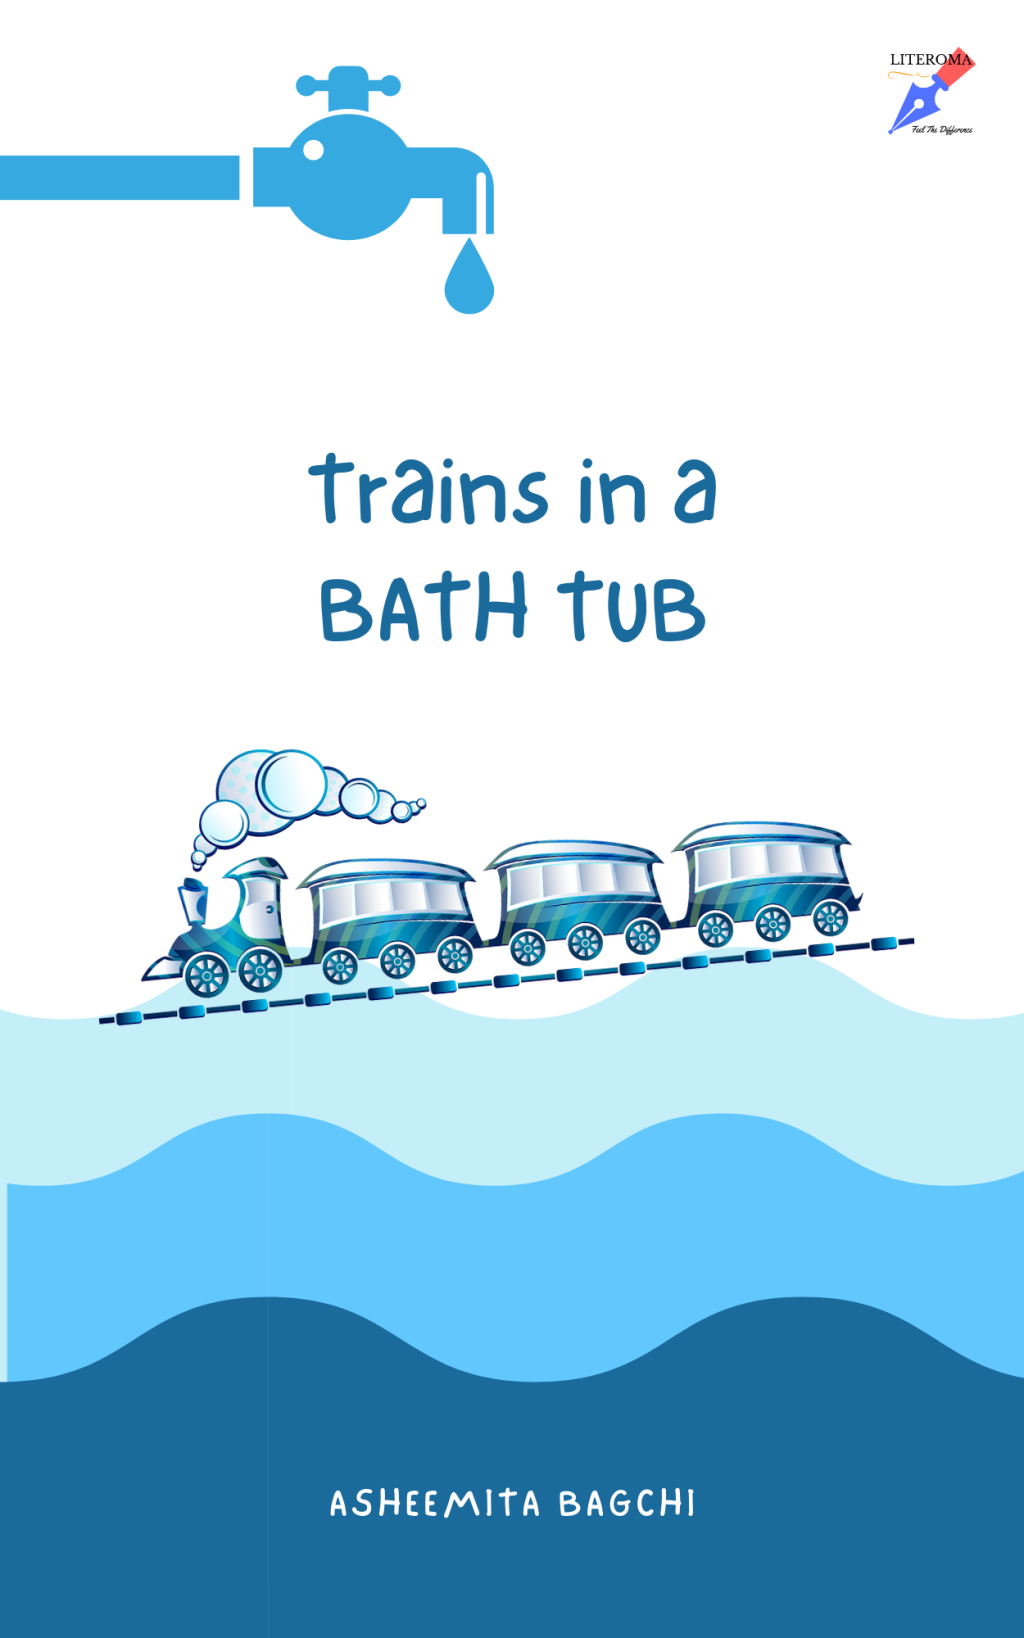 [Poetry Book Review] Trains in a Bathtub by Asheemita Bagchi